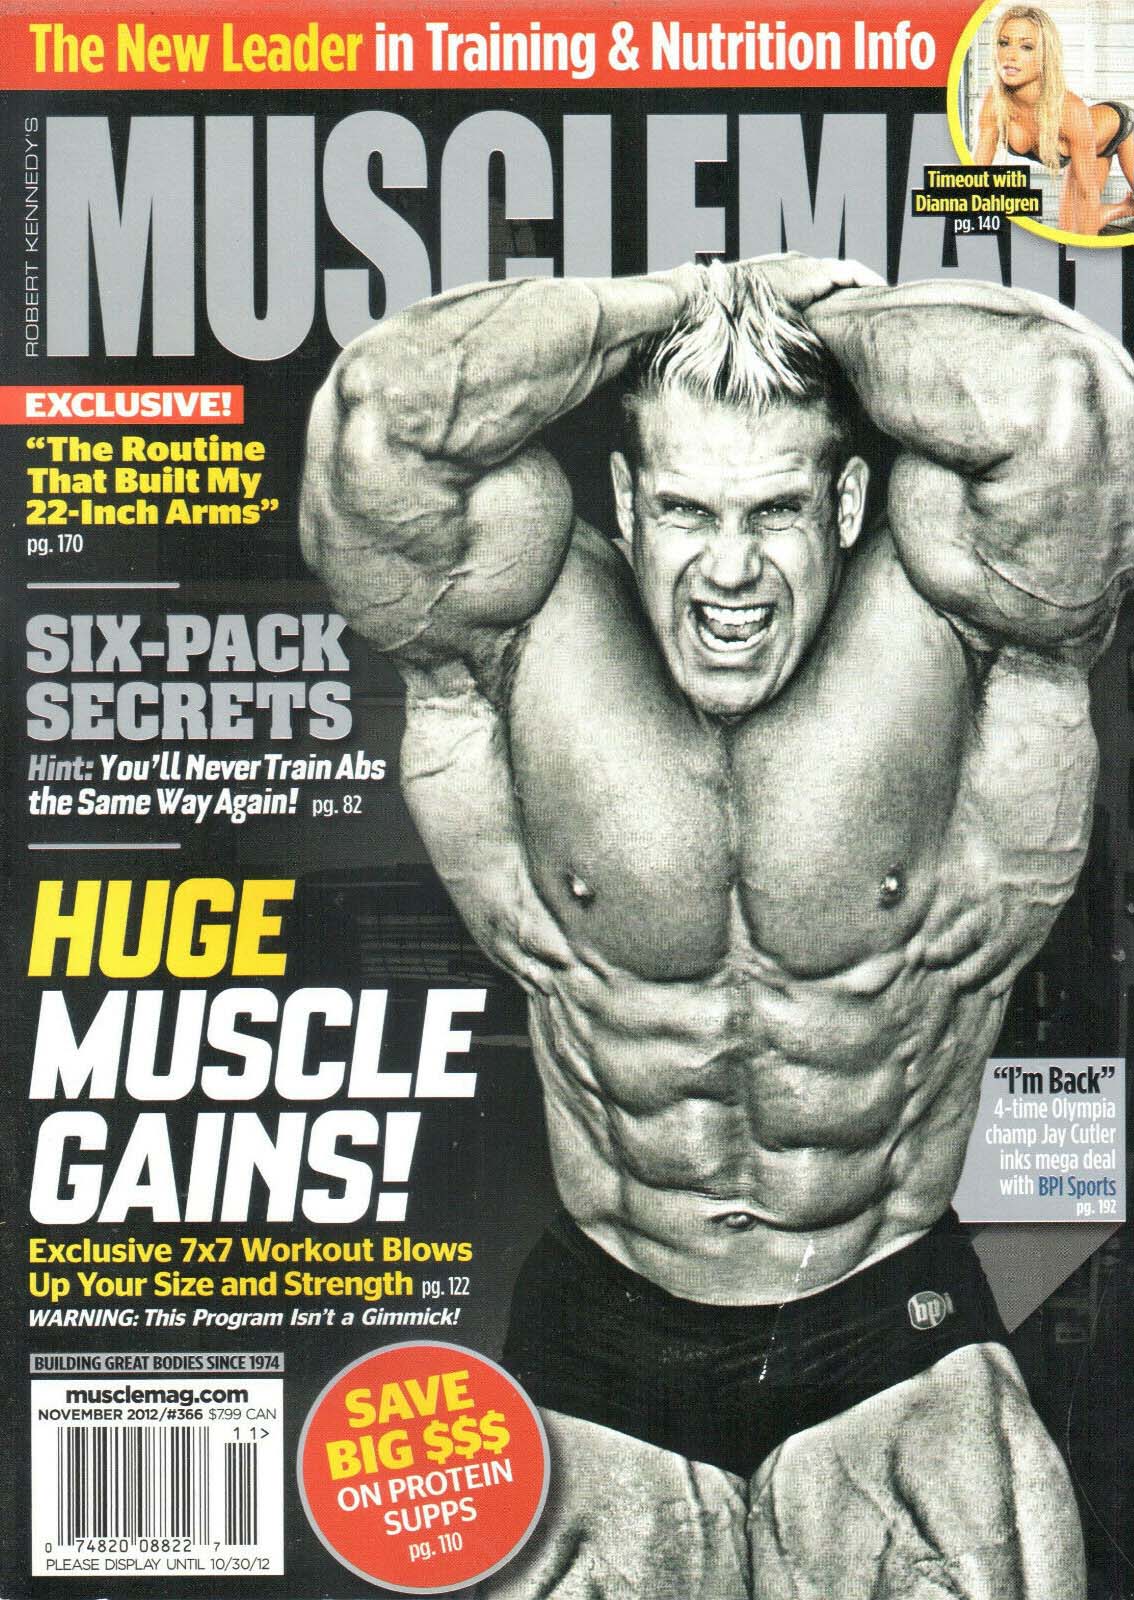 Muscle Mag November 2012 magazine back issue Muscle Mag magizine back copy Muscle Mag November 2012 Bodybuilding and Fitness Magazine Back Issue Published by Canadian Robert Kennedy and Founded in 1974. The New Leader In Training & Nutrition Info.